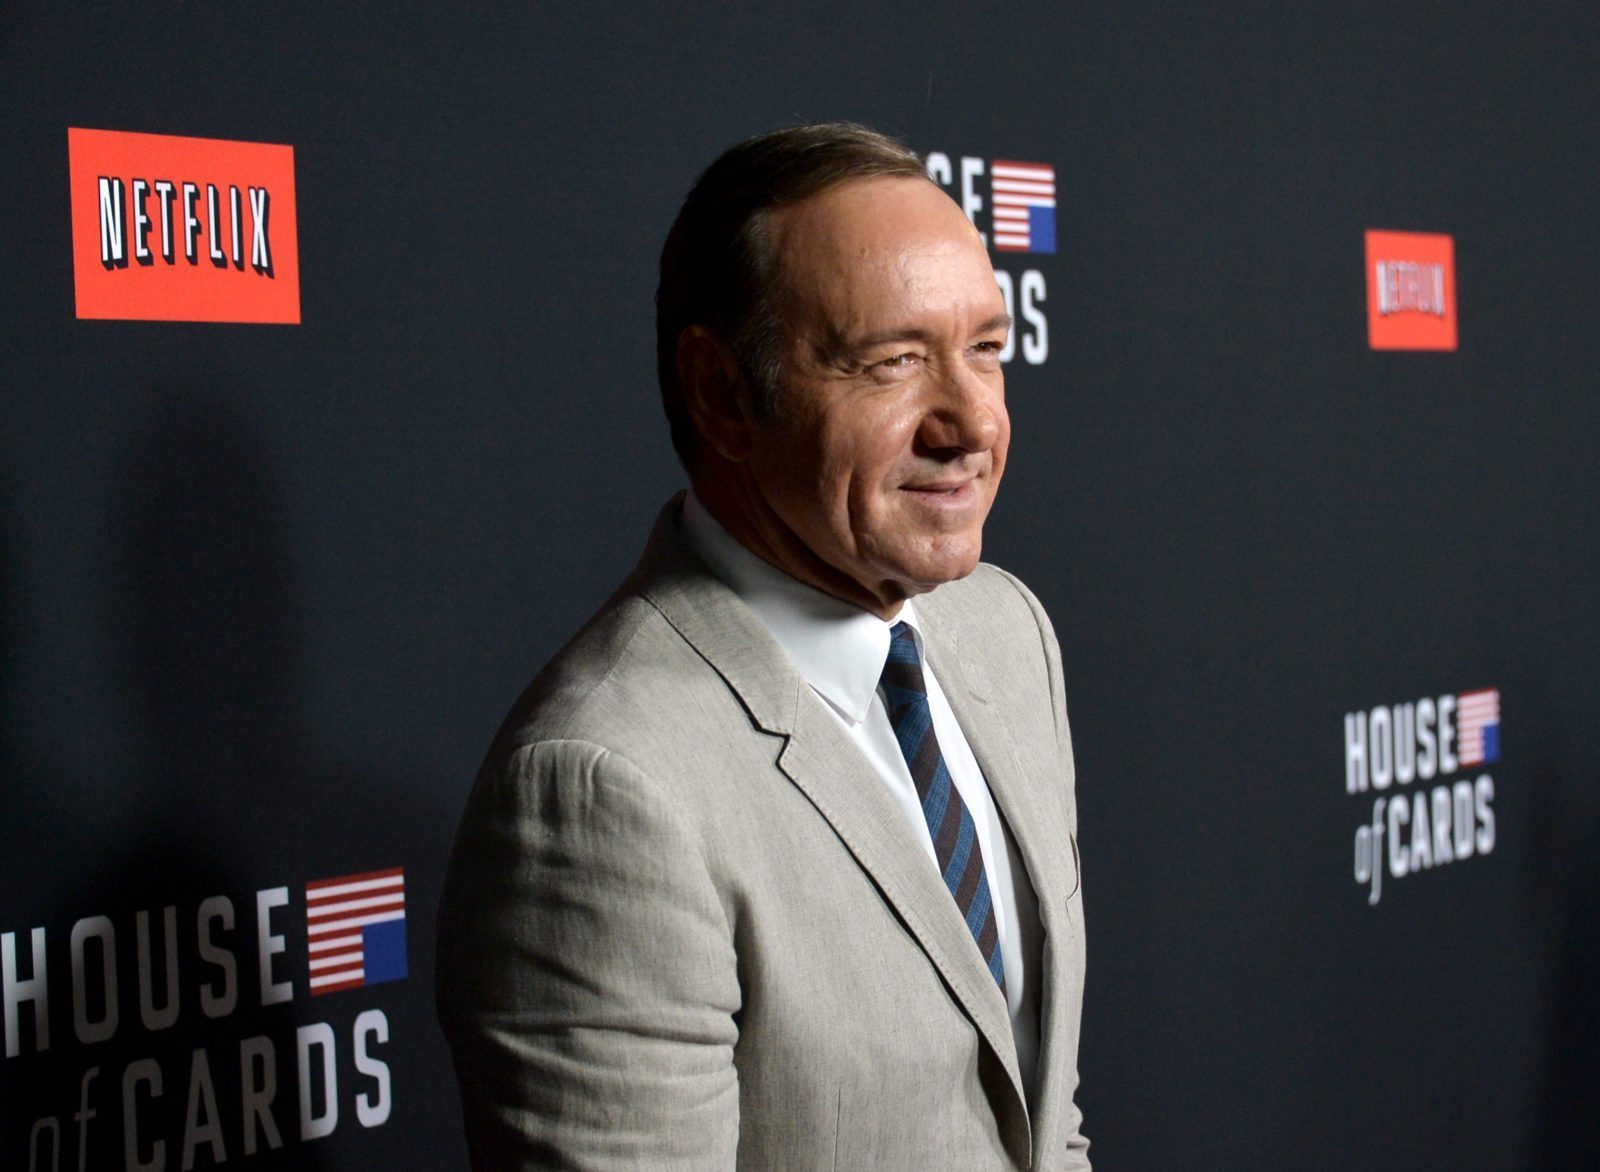 LOS ANGELES, CA - FEBRUARY 13: Producer/actor Kevin Spacey arrives at the special screening of Netflix's "House of Cards" Season 2 at the Directors Guild Of America on February 13, 2014 in Los Angeles, California. (Photo by Kevin Winter/Getty Images)